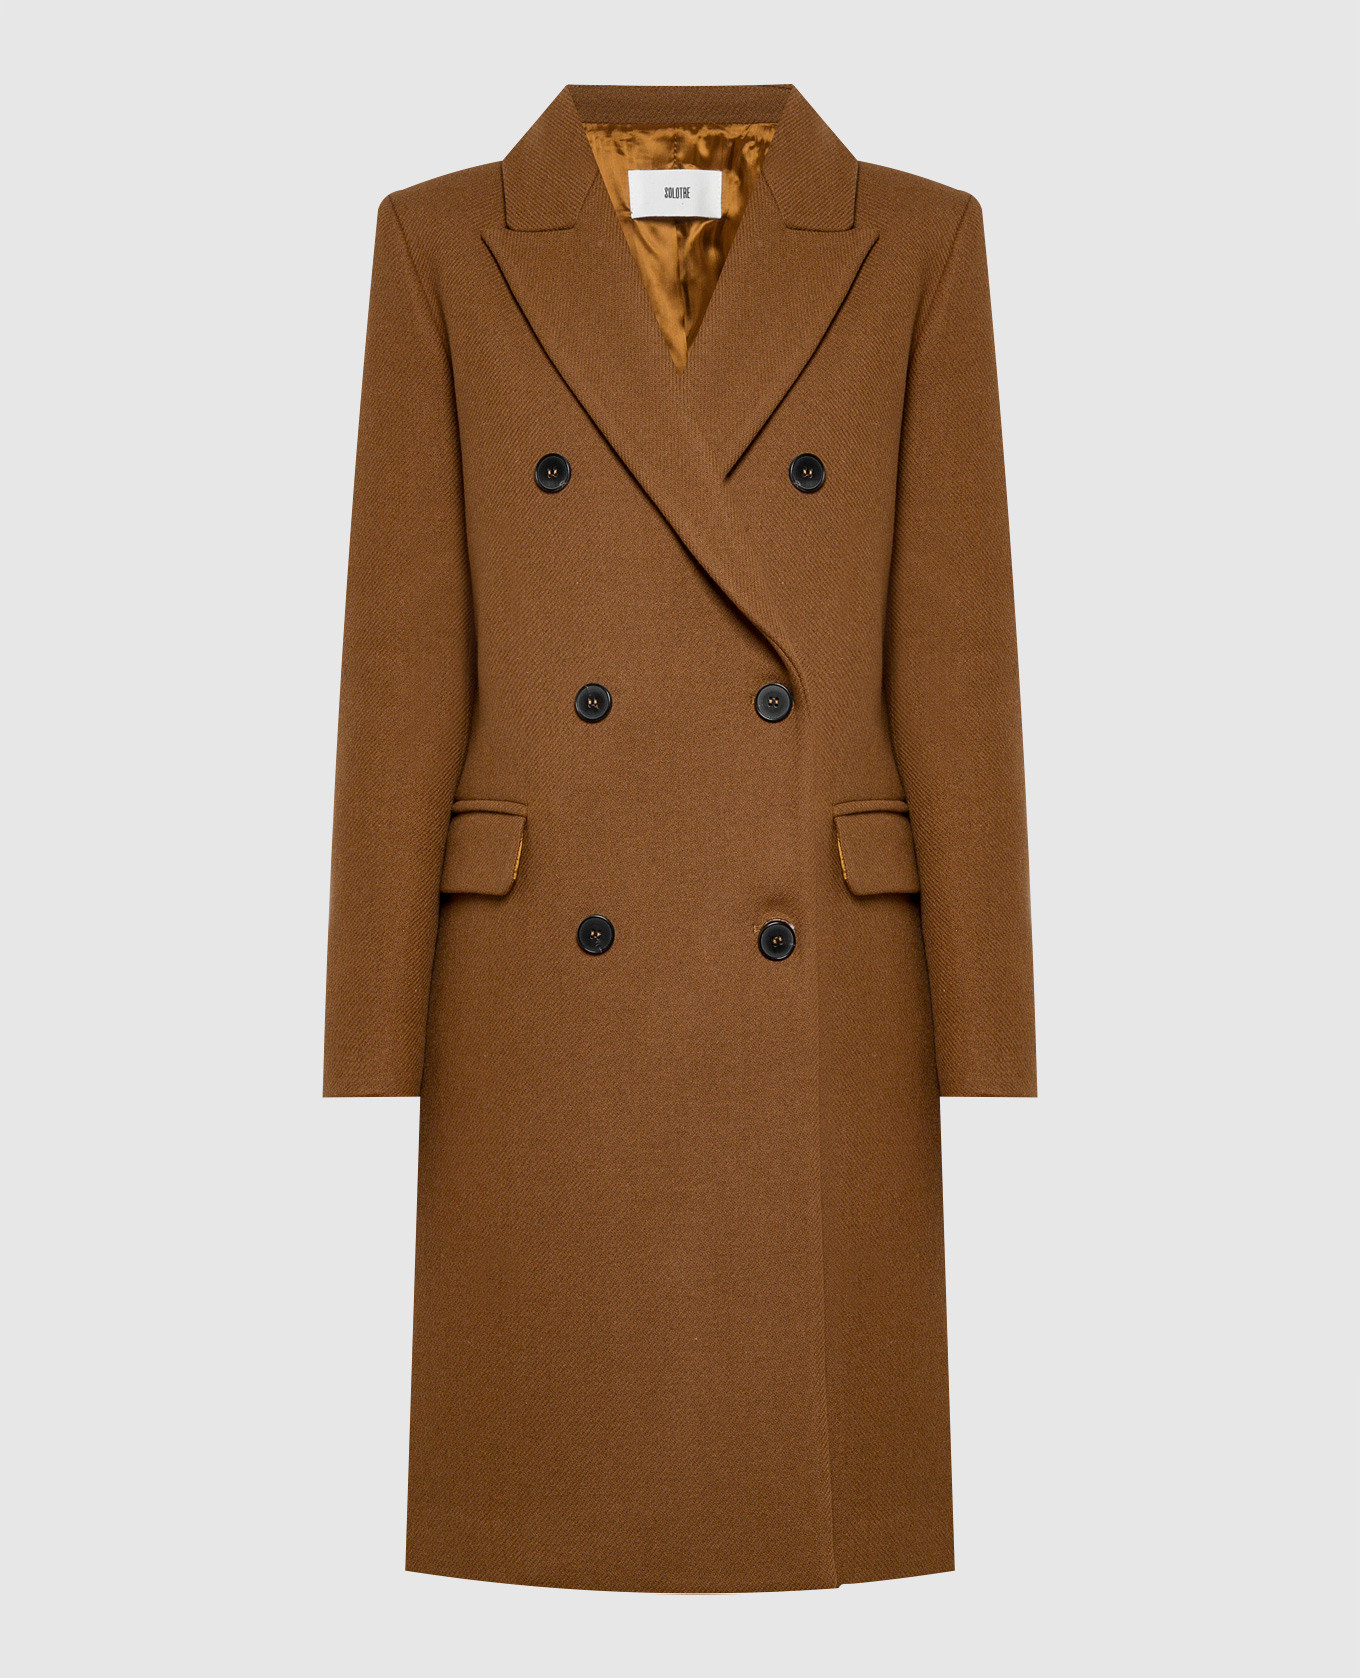 Brown double-breasted classic coat